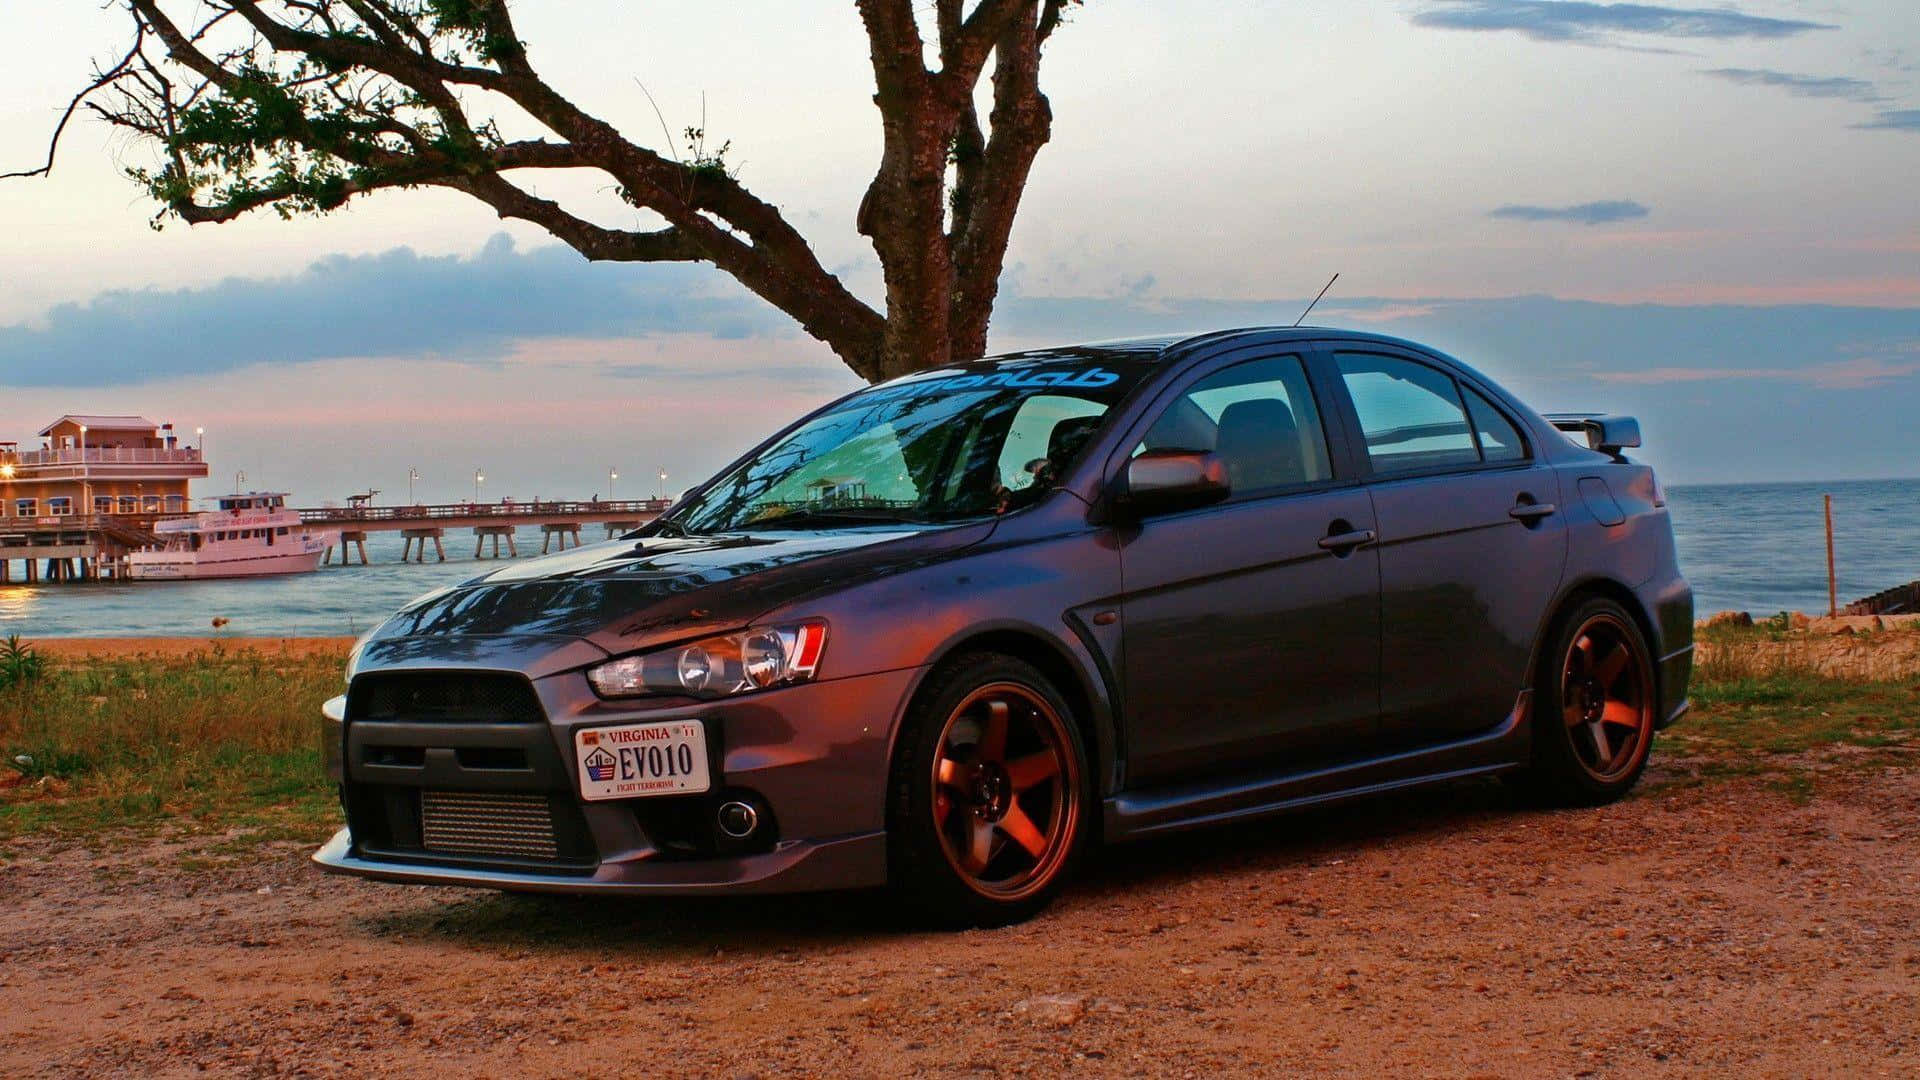 Caption: Power Unleashed: The Mitsubishi Lancer Evolution In Action Wallpaper